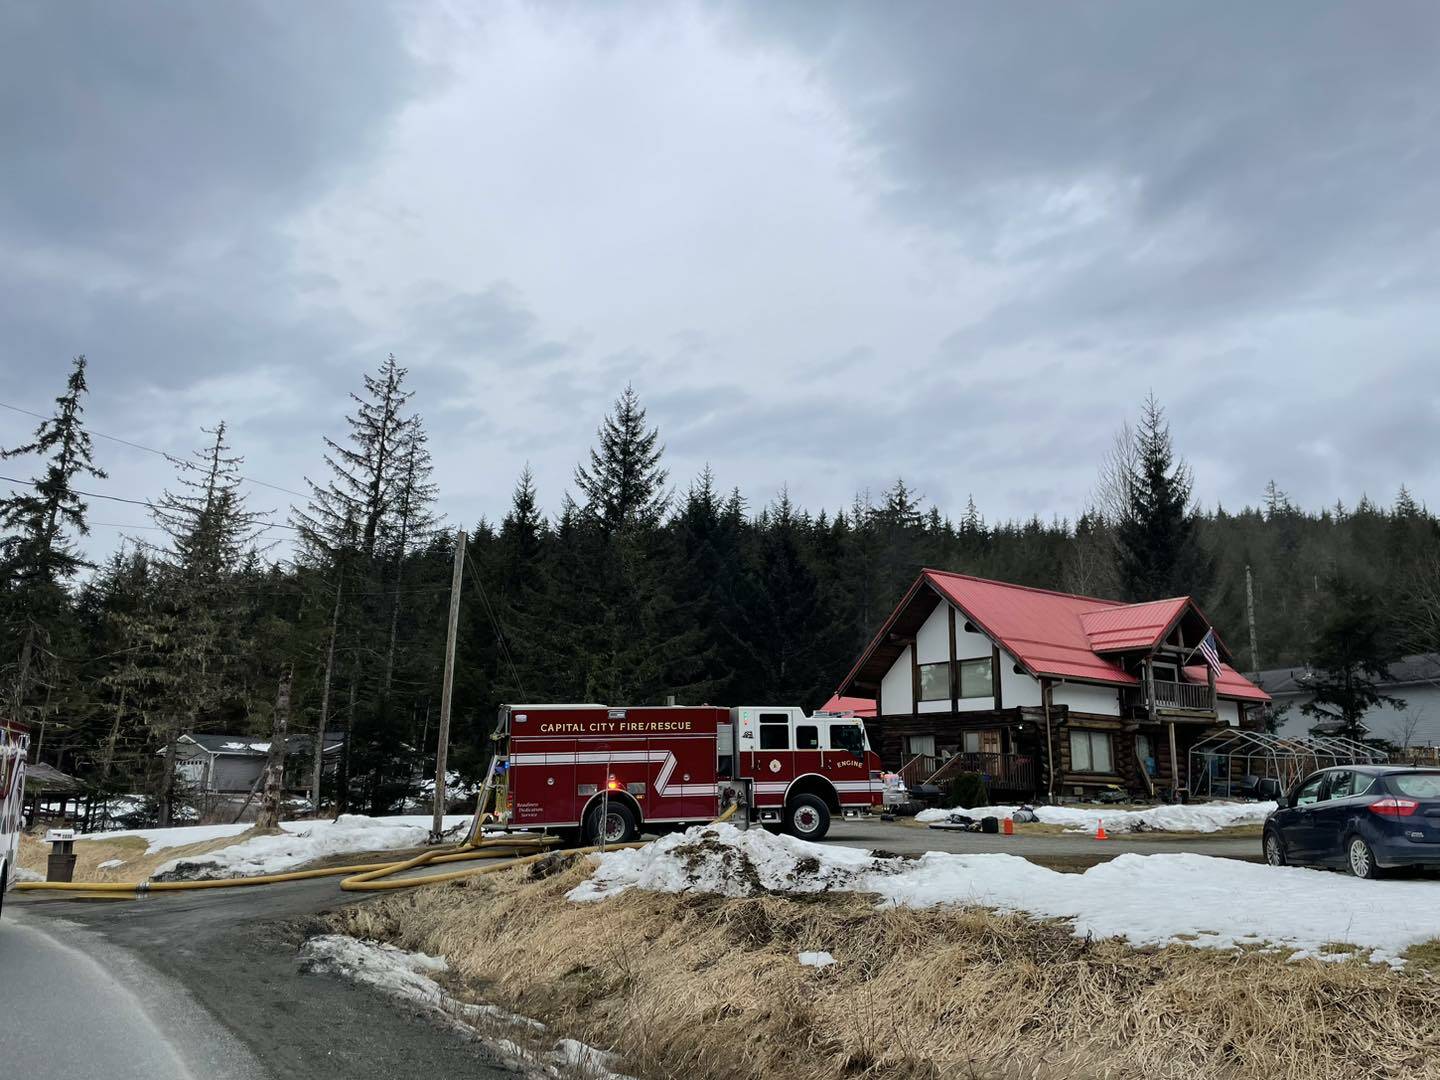 CCFR crews work to contain a residential structure fire in the 2800 block of Engineers Cut-Off Road on Thursday afternoon where it was reported that a 51-year-old man was the only casualty. (Courtesy Photo / CCFR)